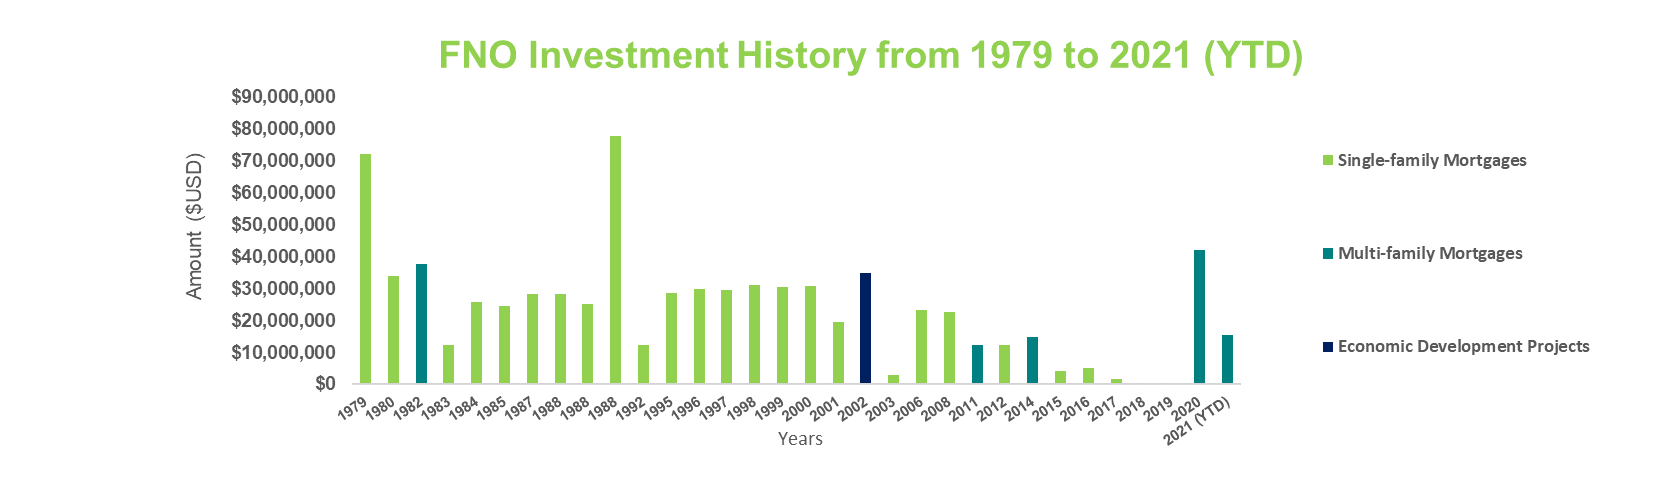 FNO Investment History from 1979 to 2021 (YTD)